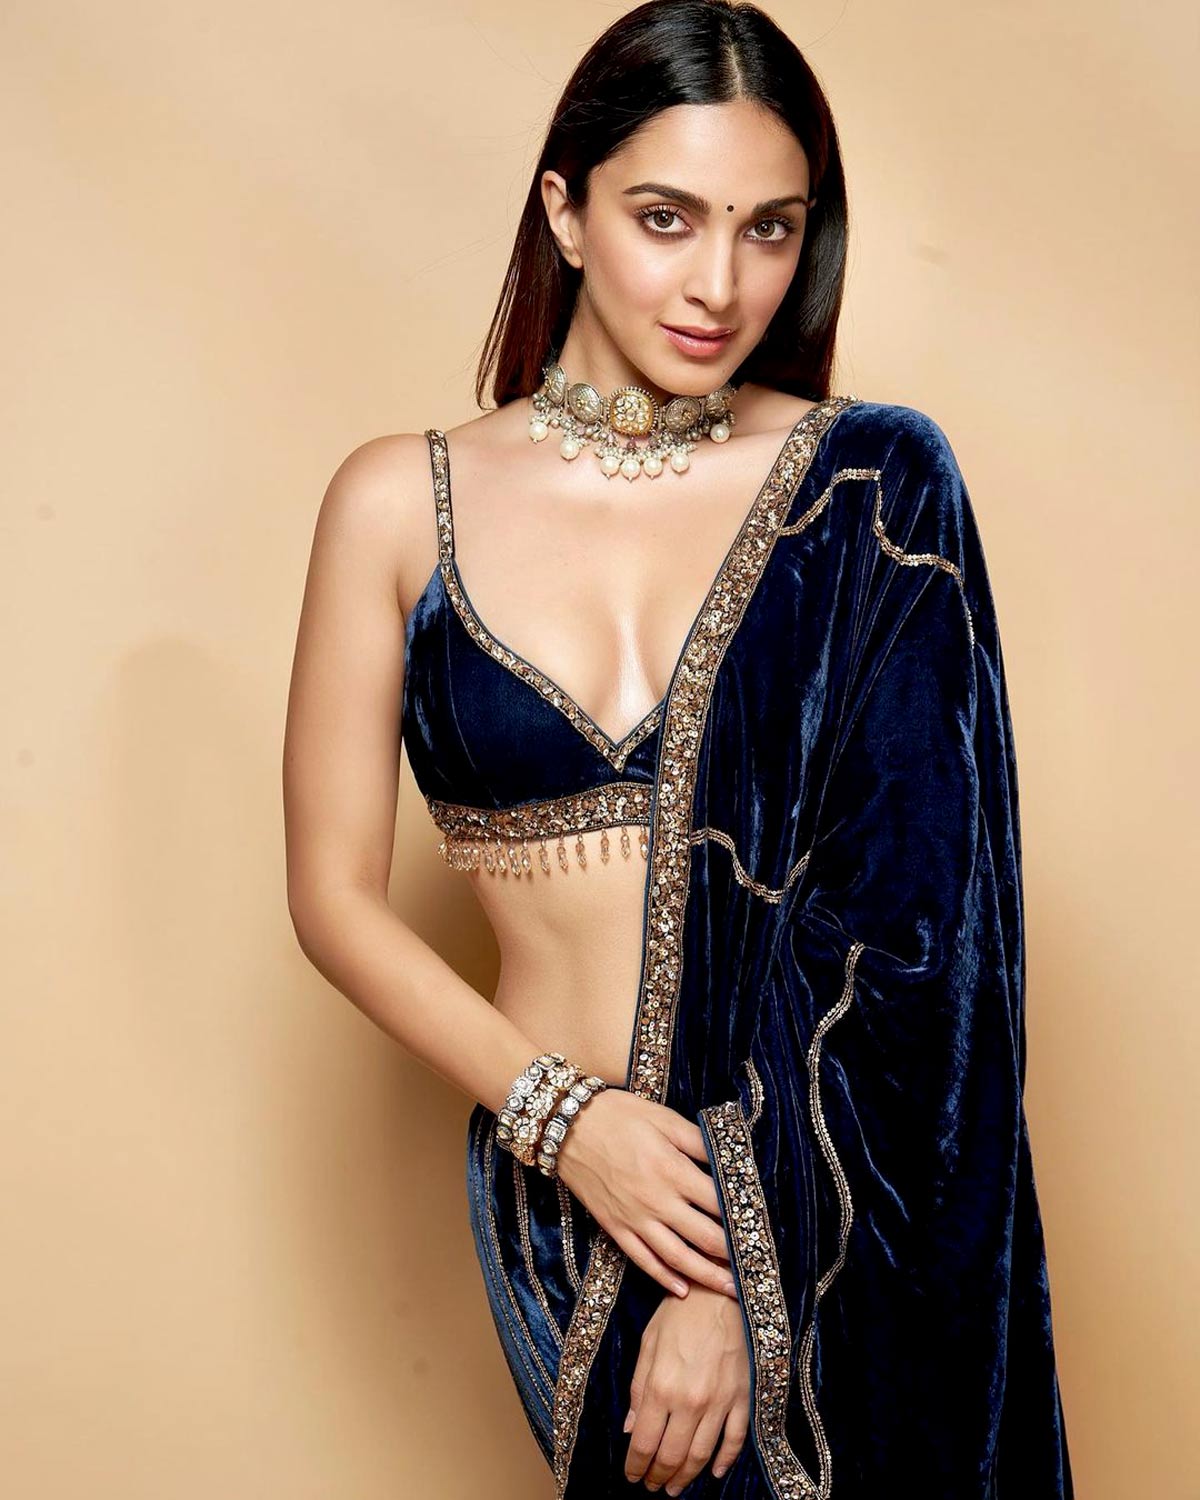 Is This What Kiara Will Wear To Her Wedding? - Rediff.com